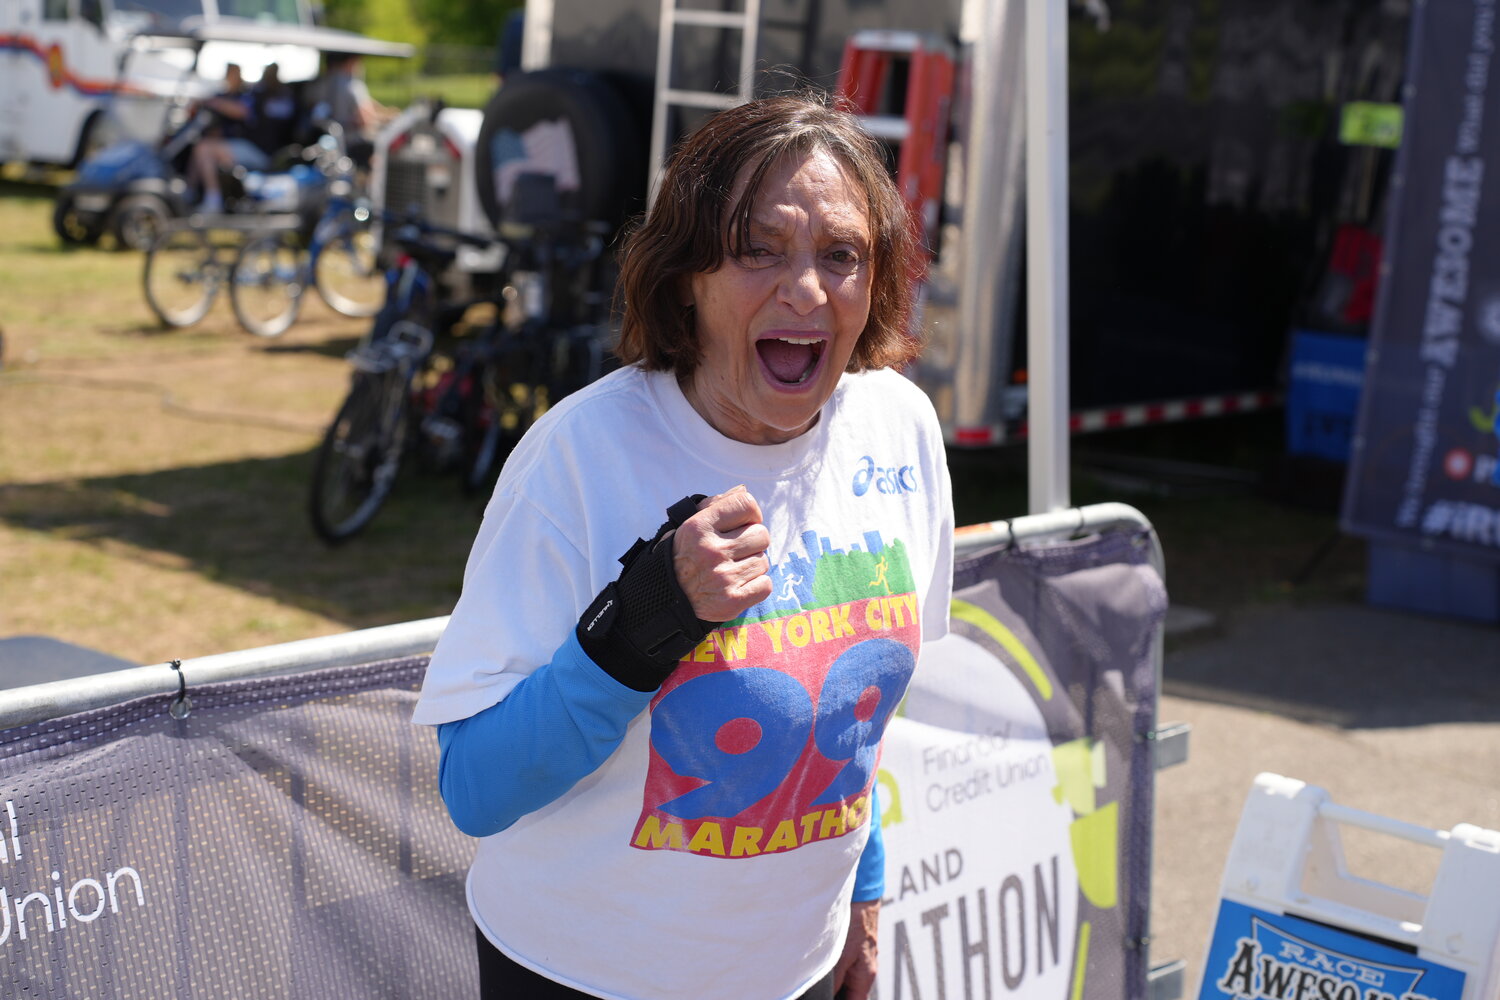 Nina Kuscsik, a retired long-distance runner and Long Island native show her support for runners at the Jovia Long Island Marathon. The 84-year-old was the first woman to officially win the Boston Marathon back in 1972, and has run in more than 80 marathons in her lifetime.